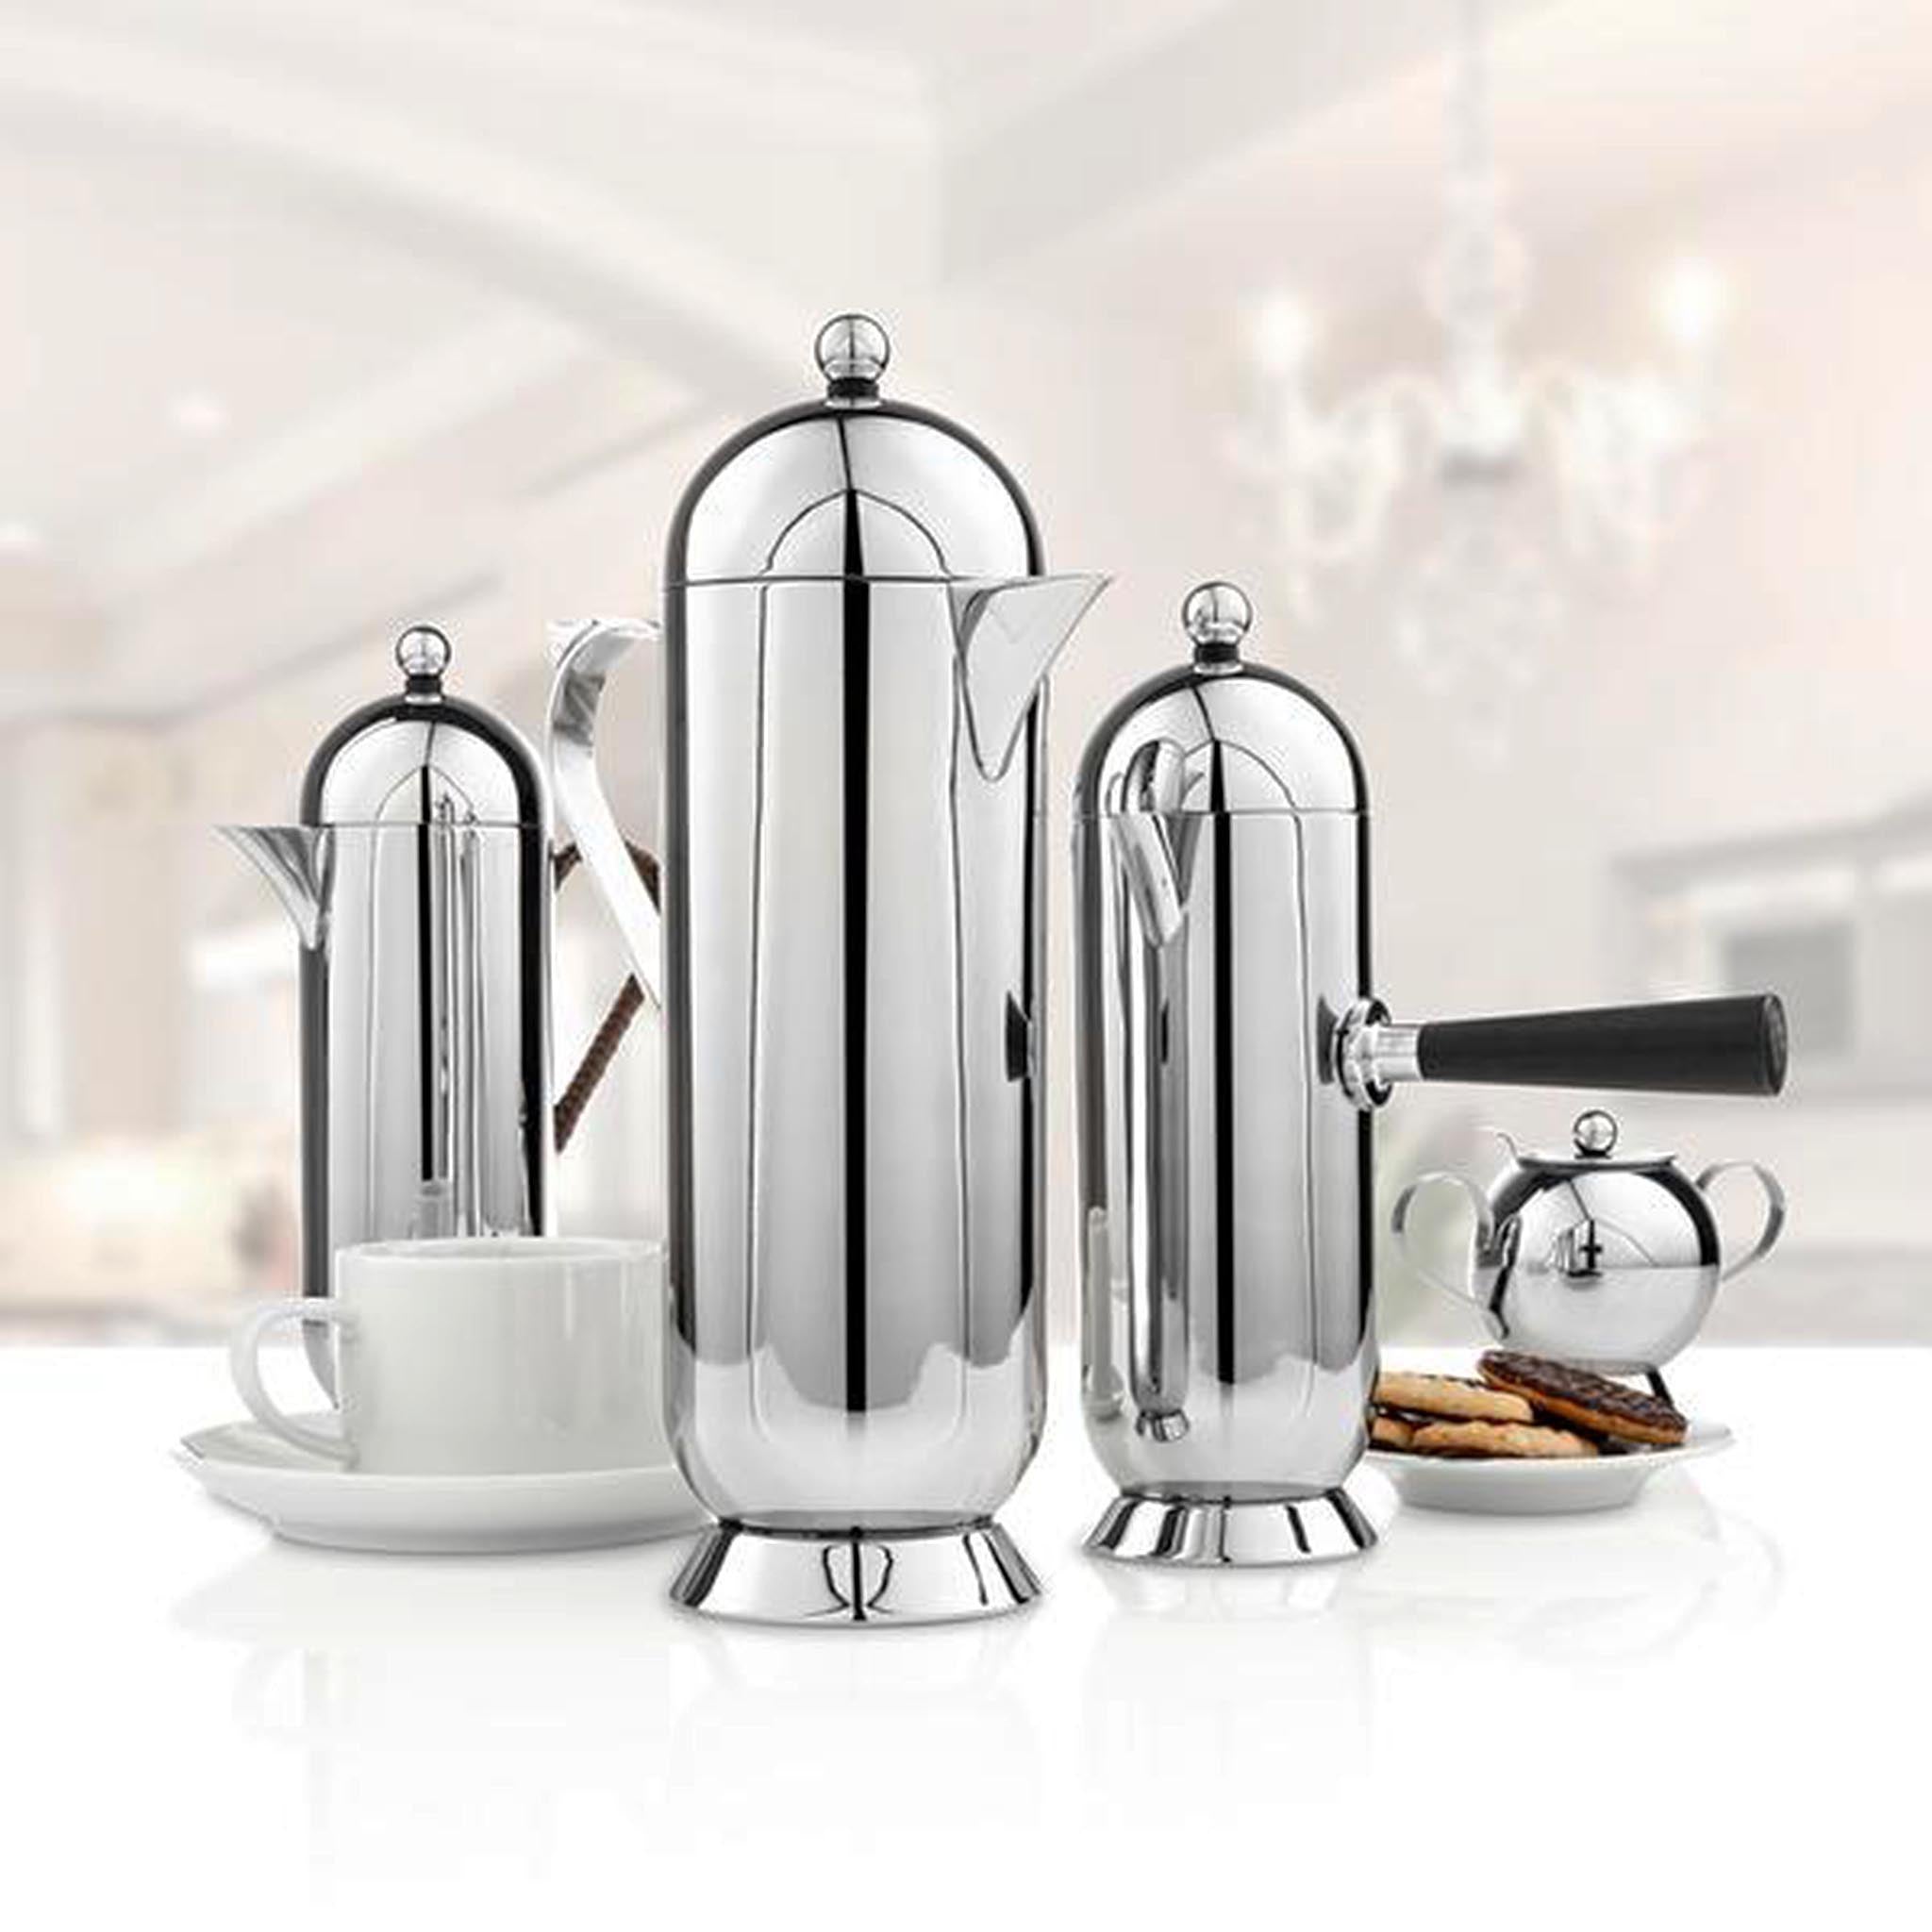 Nick Munro Coffee Collection. Effortlessly stylish in any setting. Cafetiere and French-press coffee pots.